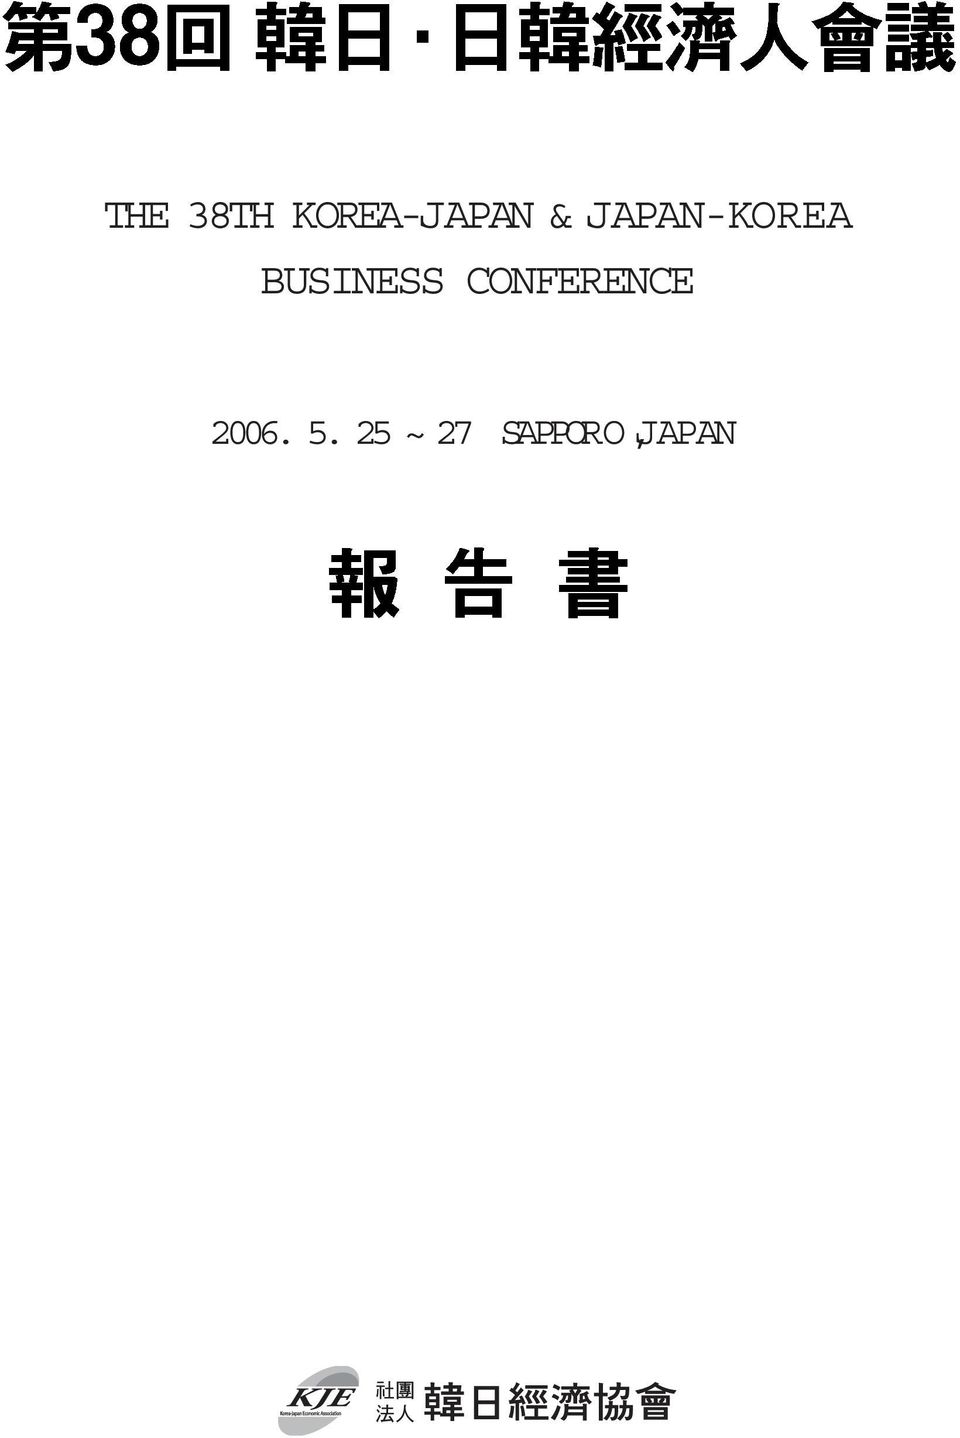 BUSINESS CONFERENCE